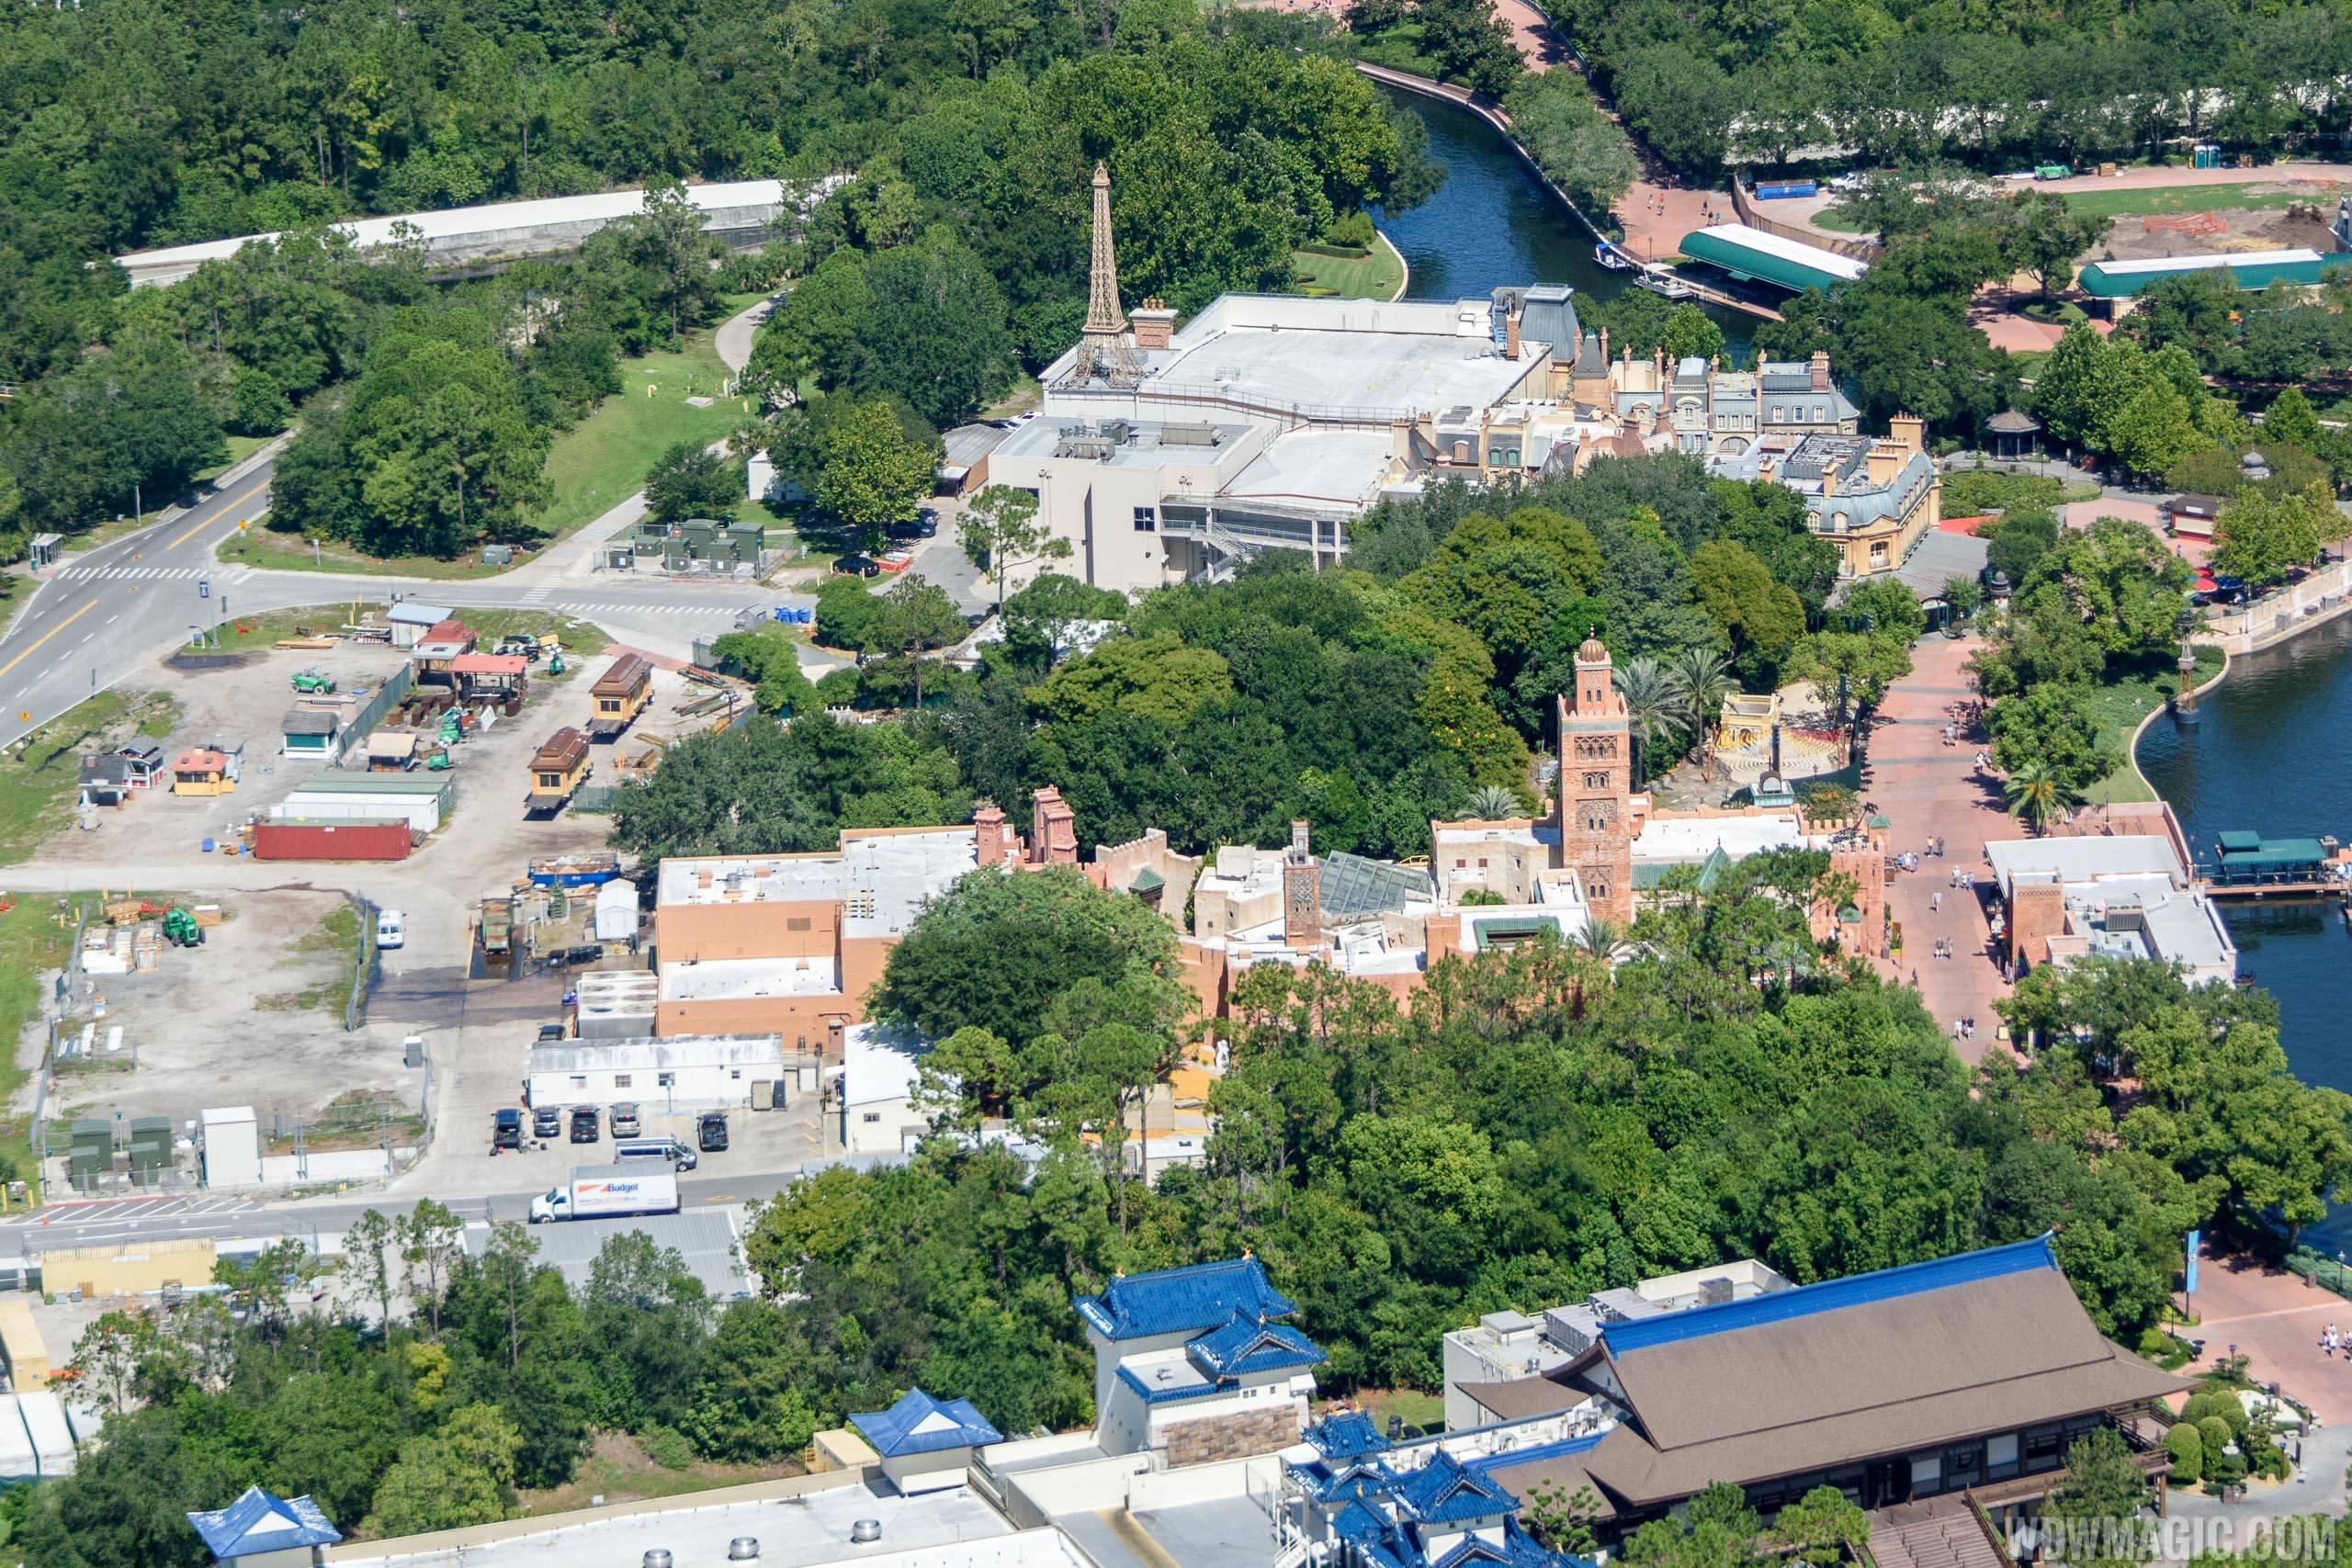 PHOTO - An aerial view of the Ratatouille site at Epcot